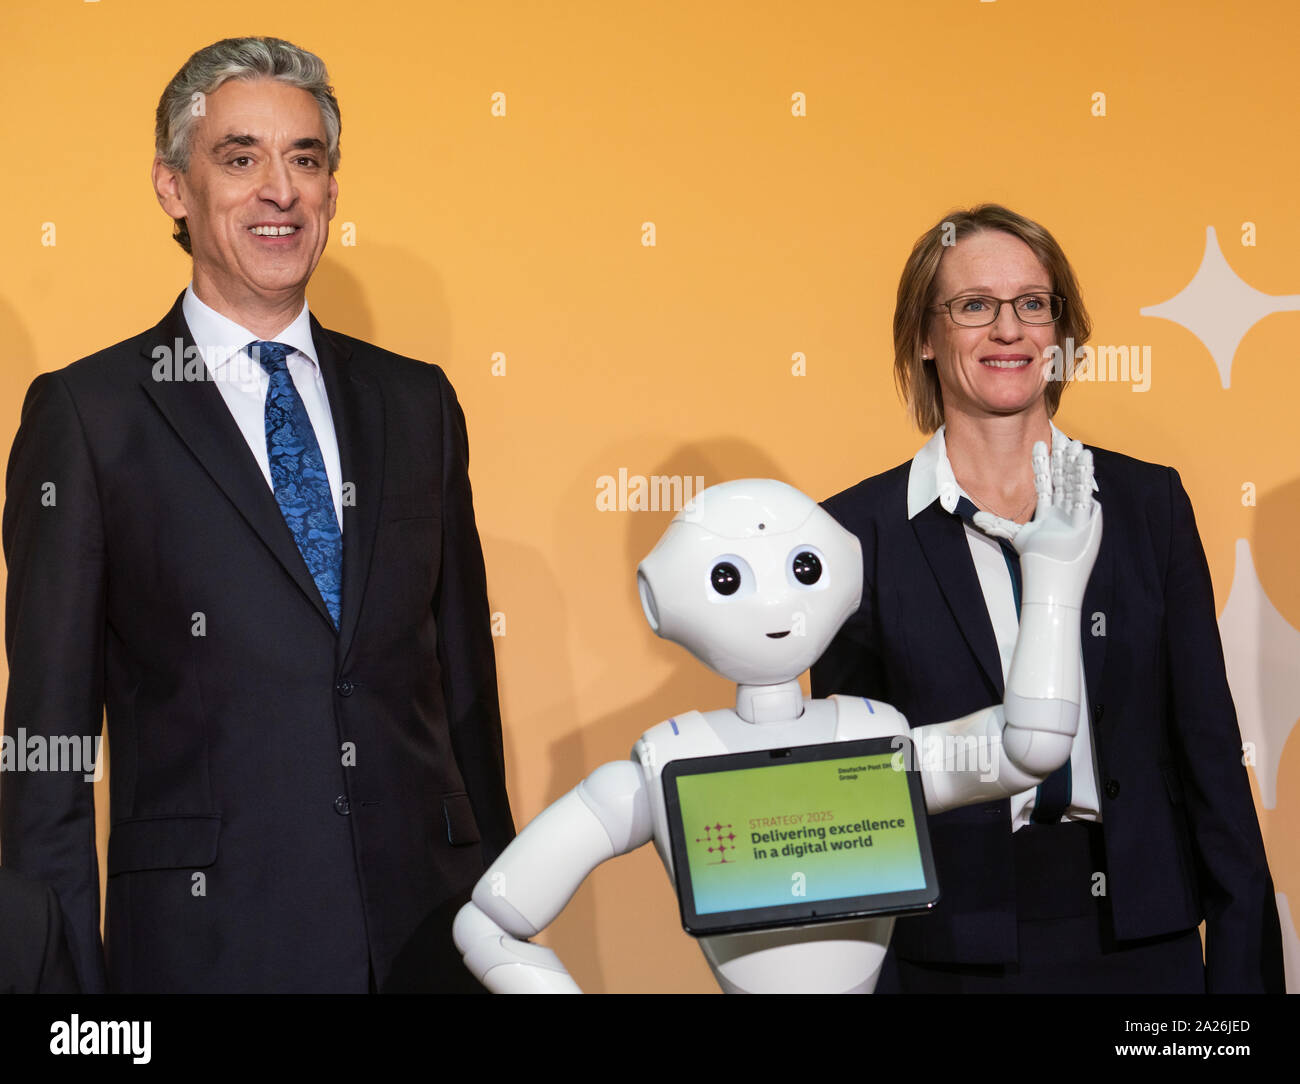 01 October 2019, Hessen, Frankfurt/Main: Frank Appel (l), CEO of Deutsche Post AG, and Chief Financial Officer Melanie Kreis (r) stand next to a robot at a photo shoot before the start of a press conference before presenting Deutsche Post's strategy up to 2025. Every five years, the Bonn-based Group updates its approach. Photo: Frank Rumpenhorst/dpa Stock Photo